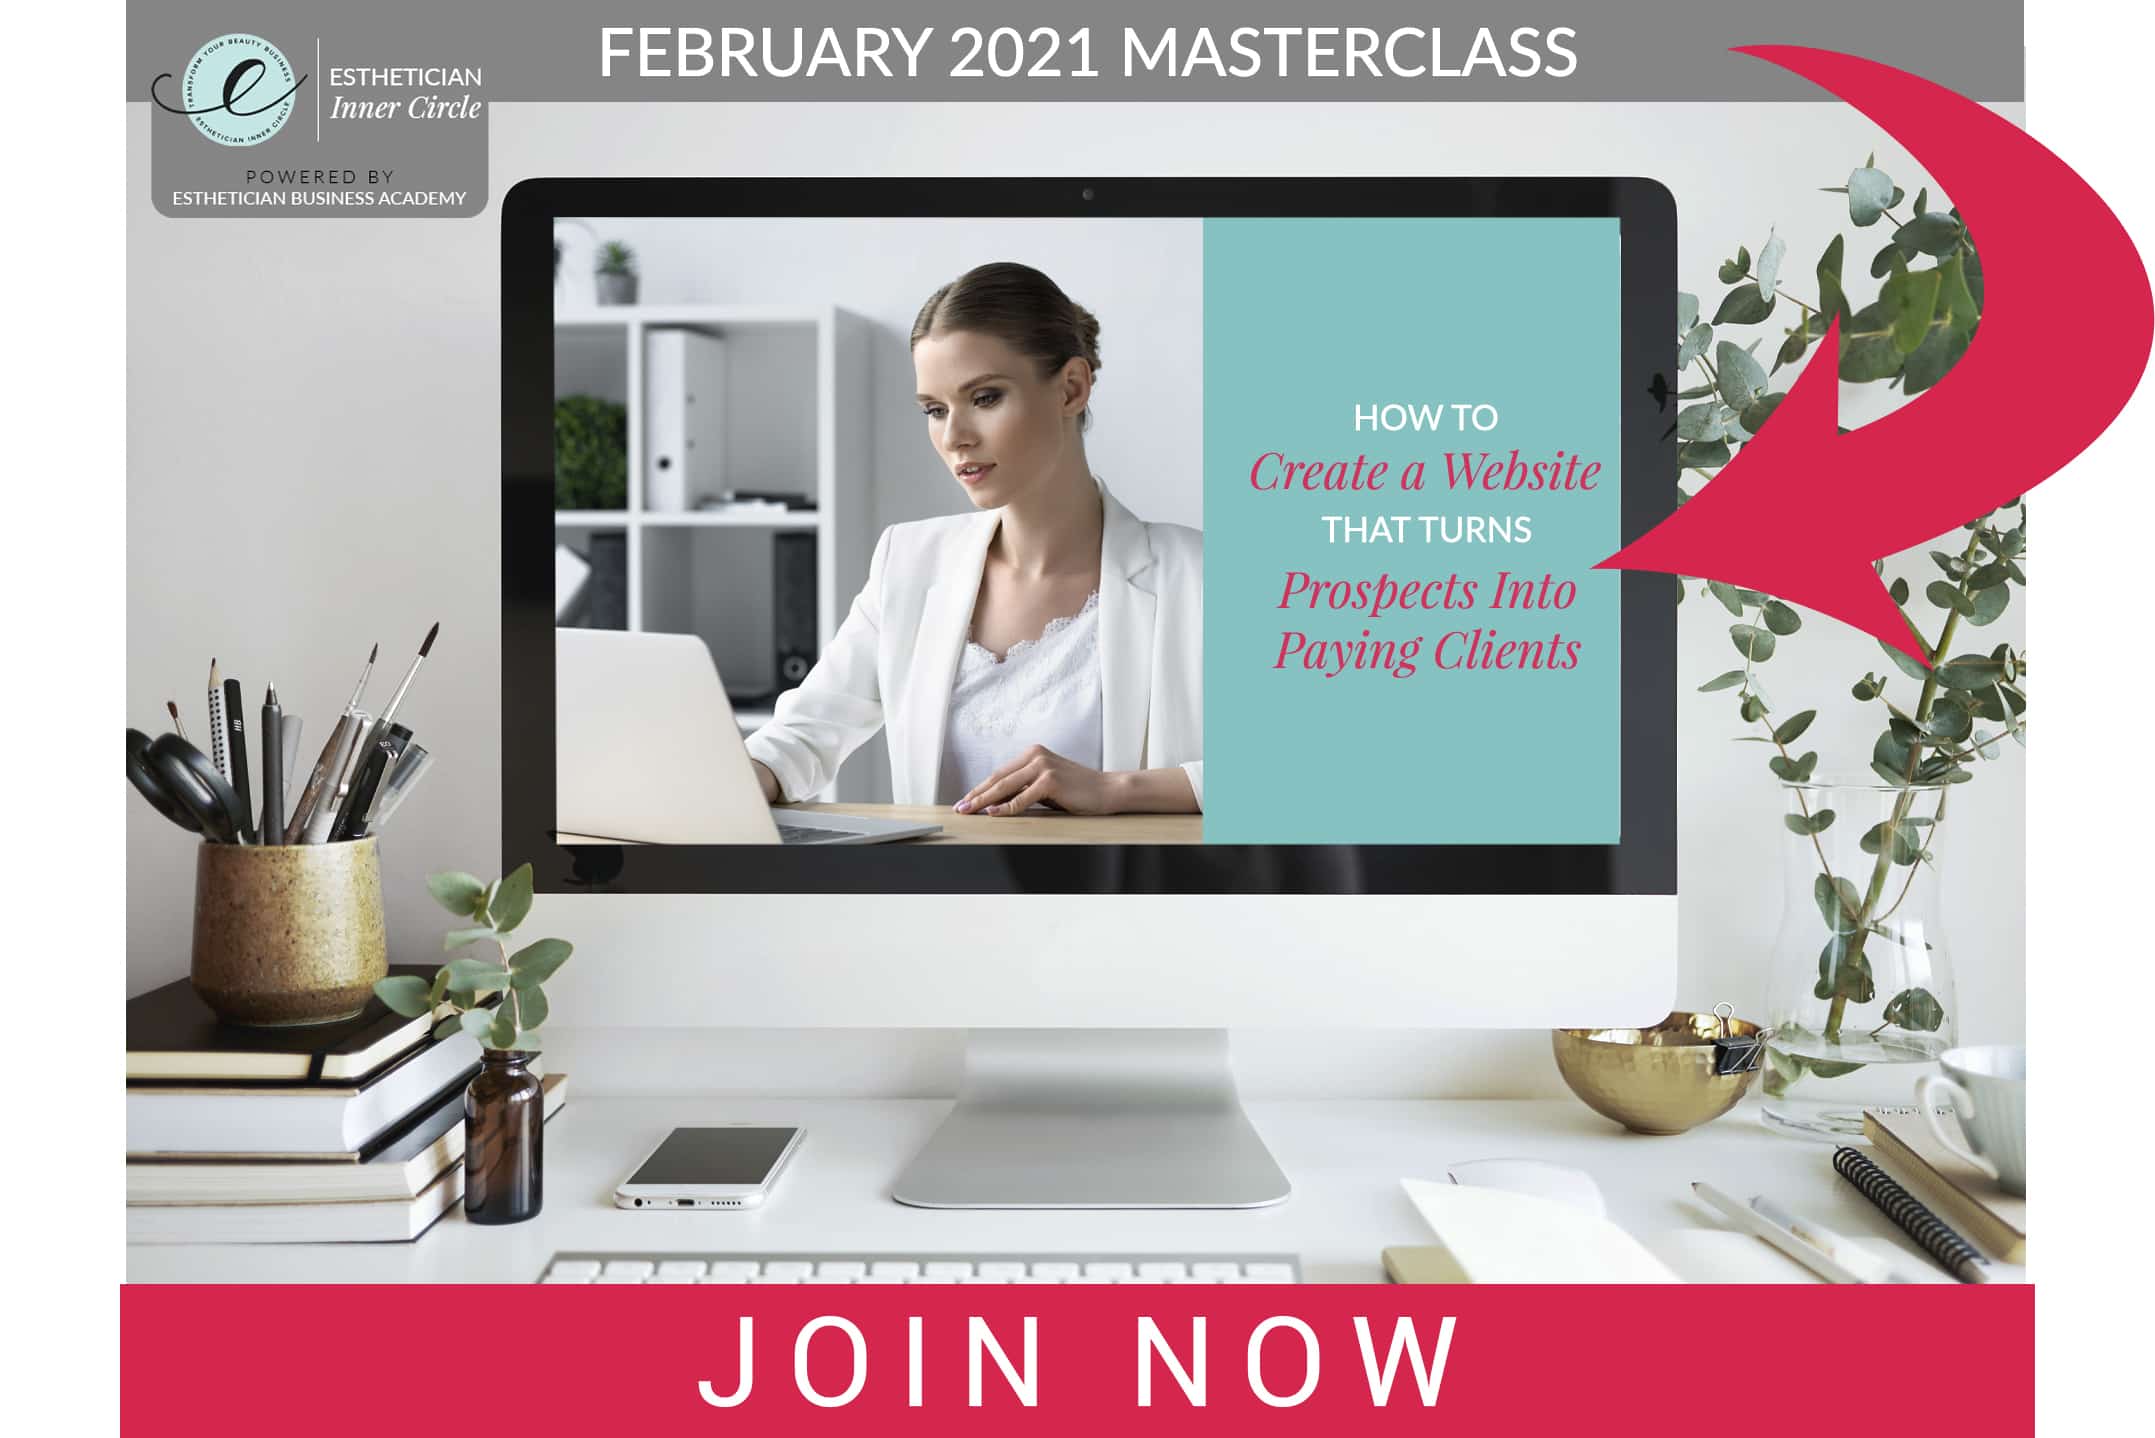 Esthetician Inner Circle Masterclass - Create a Website That Converts Clients